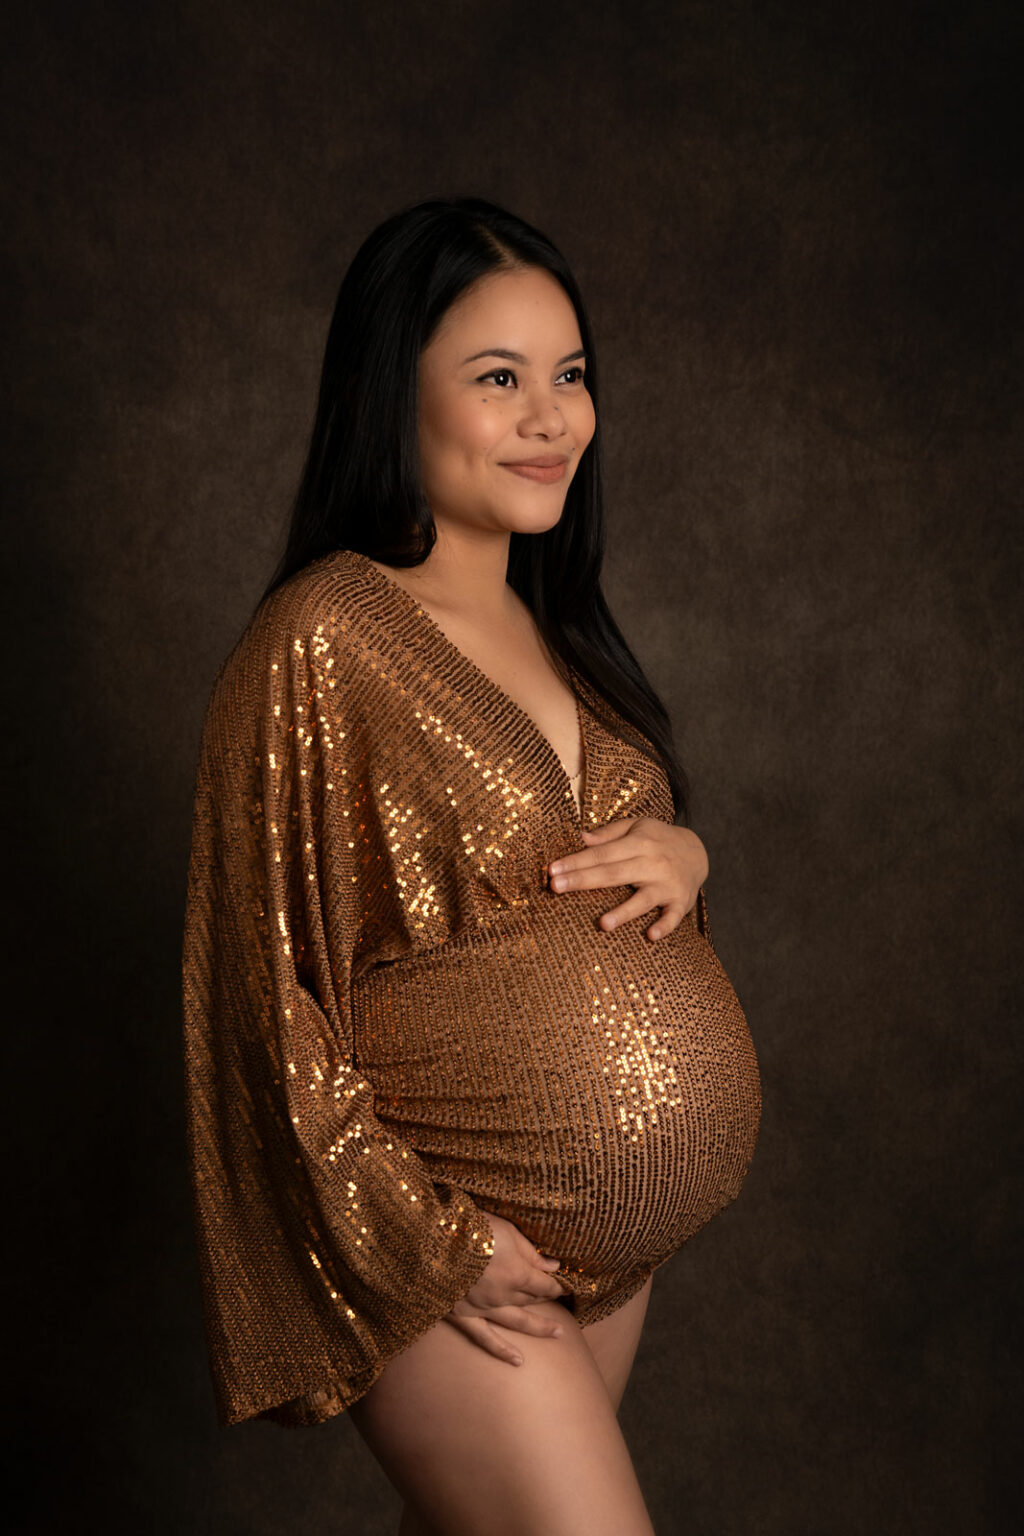 Pregnant lady posing in a gold glittery bodysuit against a dark backdrop for a maternity photoshoot.